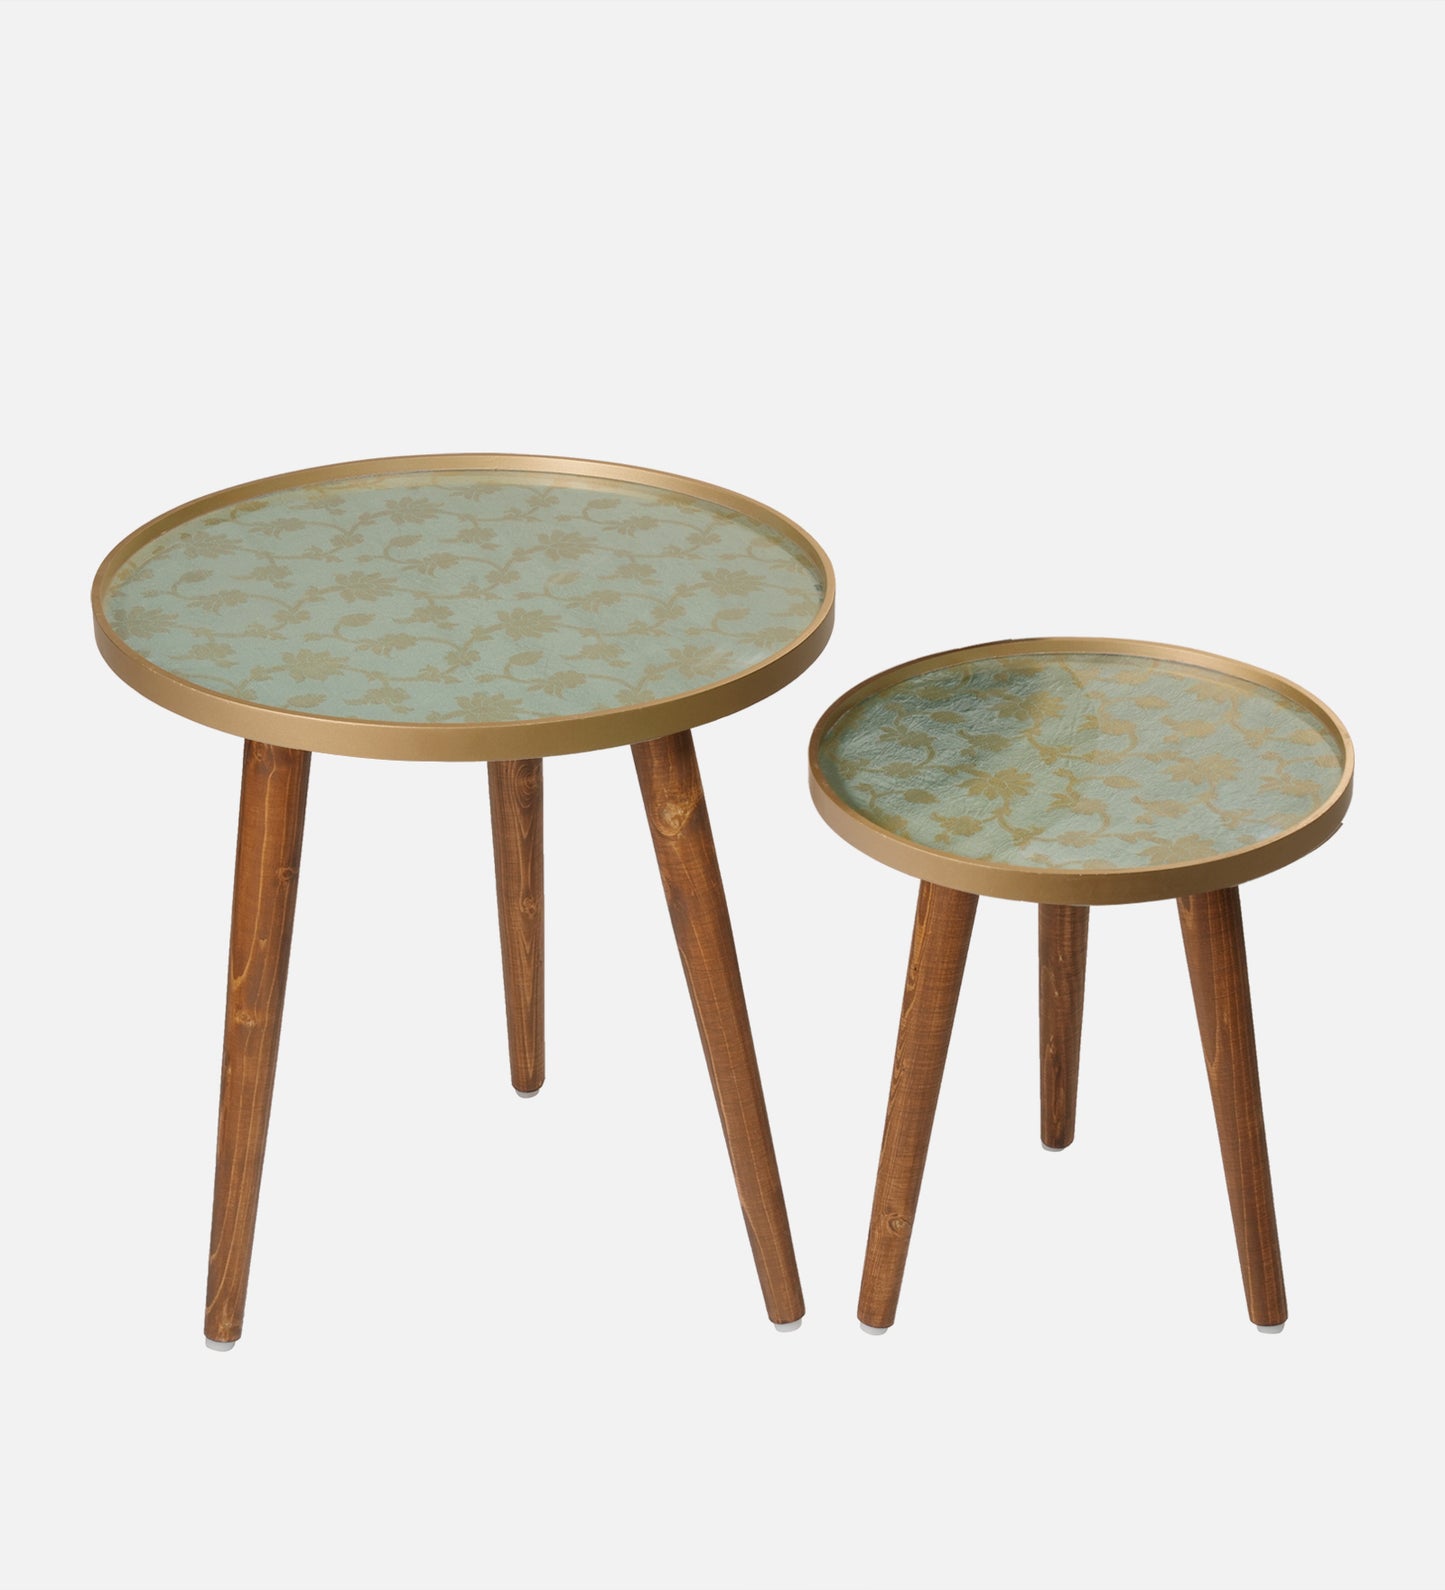 Soundarya Round Nesting Tables with Wooden Legs, Side Tables, Wooden Tables, Living Room Decor by A Tiny Mistake